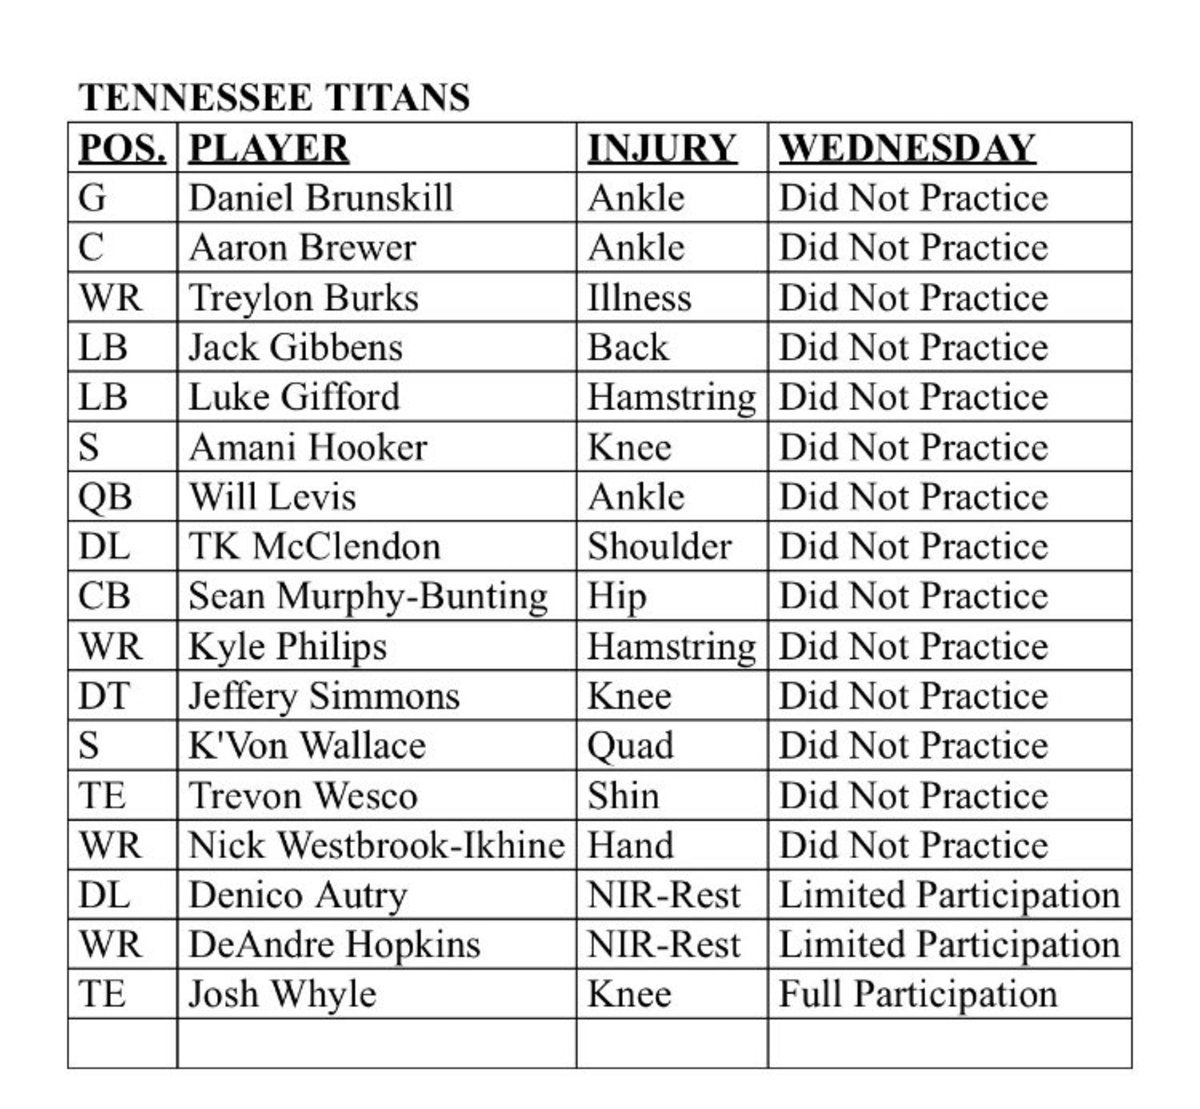 Tennessee Titans Week 16 Wednesday Injury Report